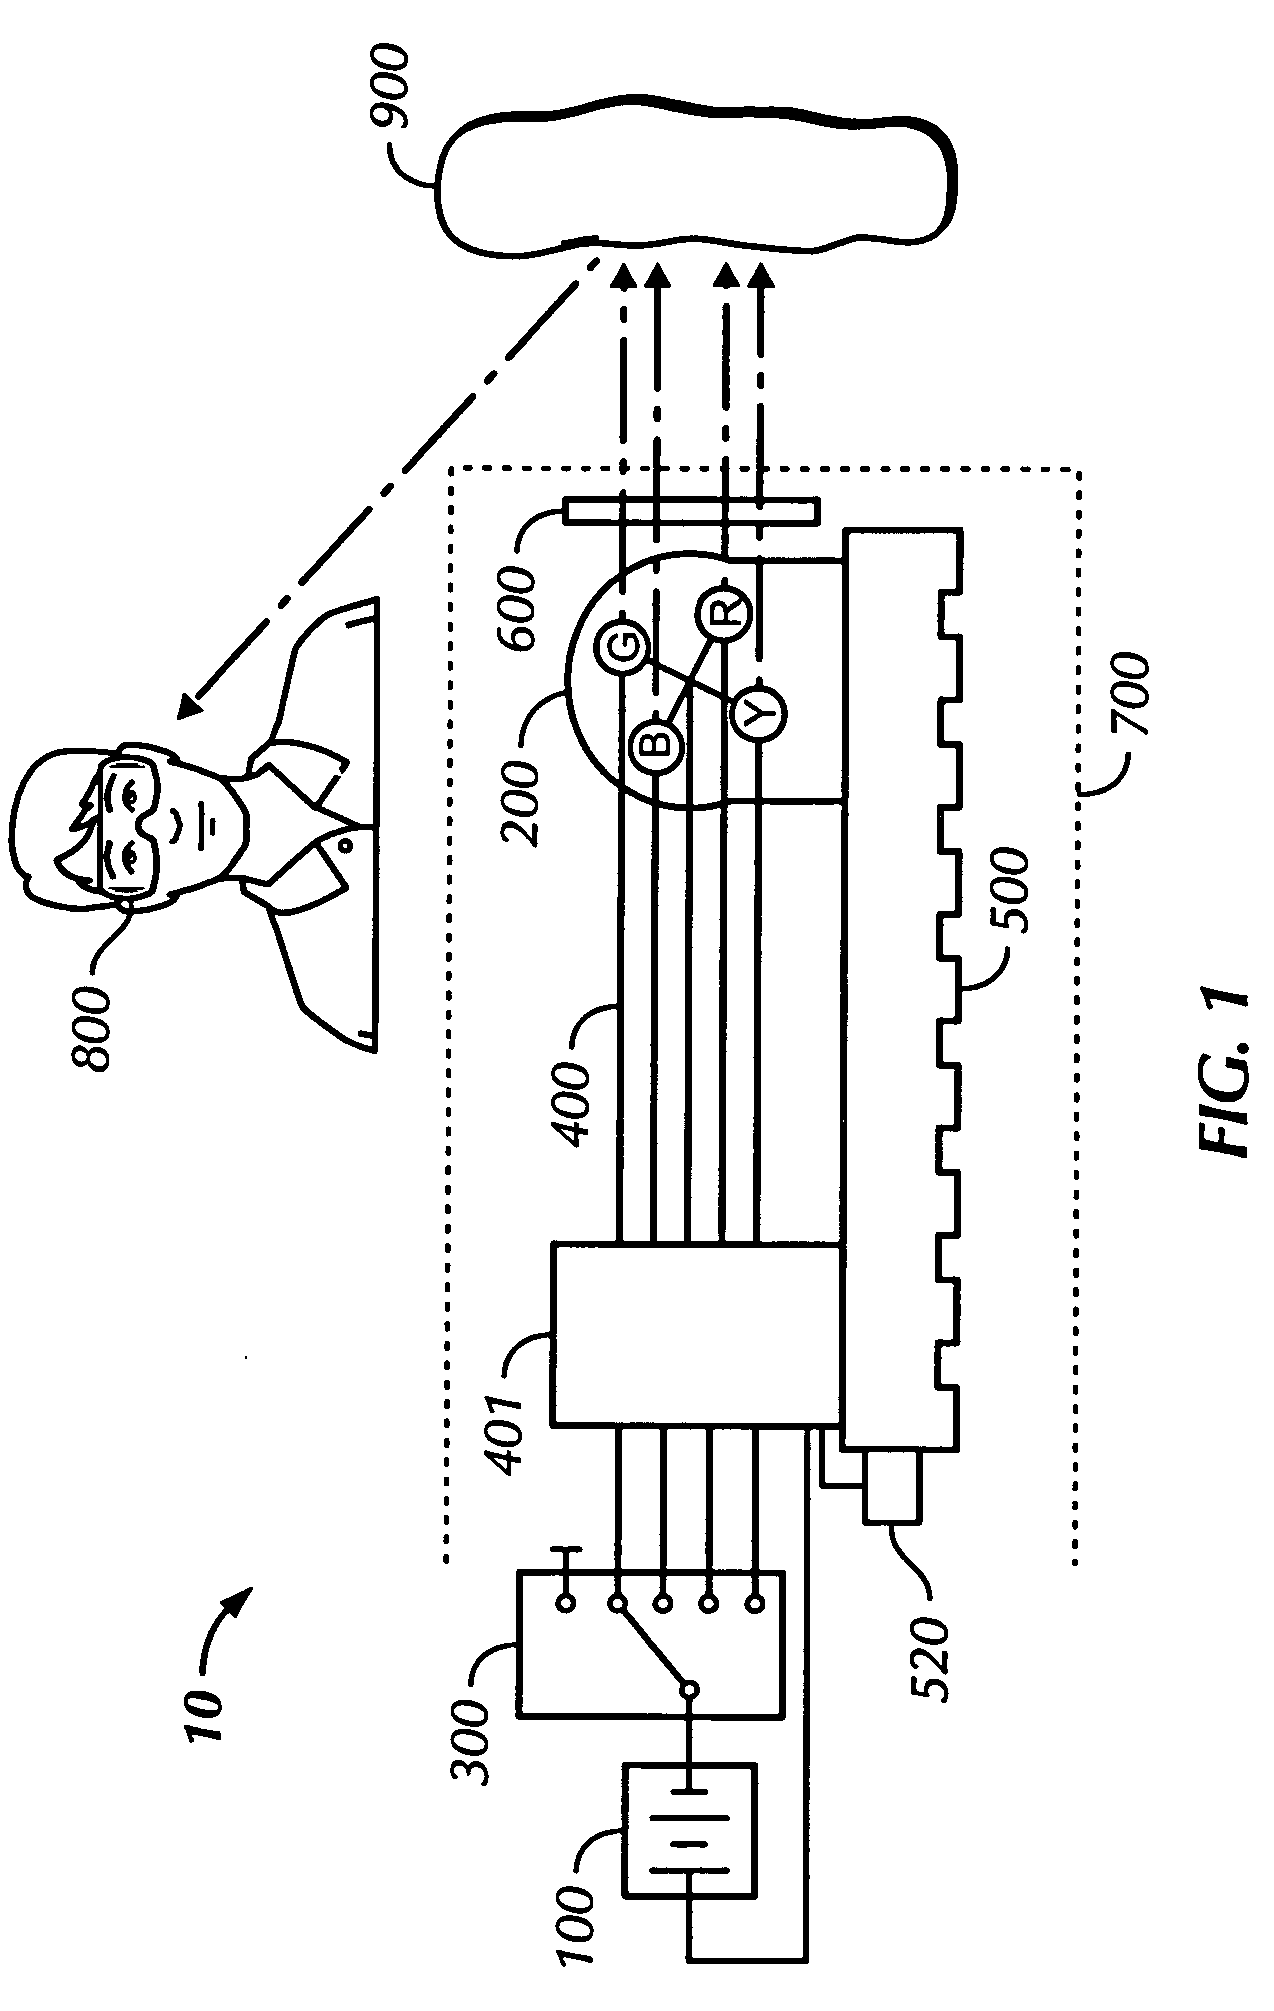 Oral cancer screening device